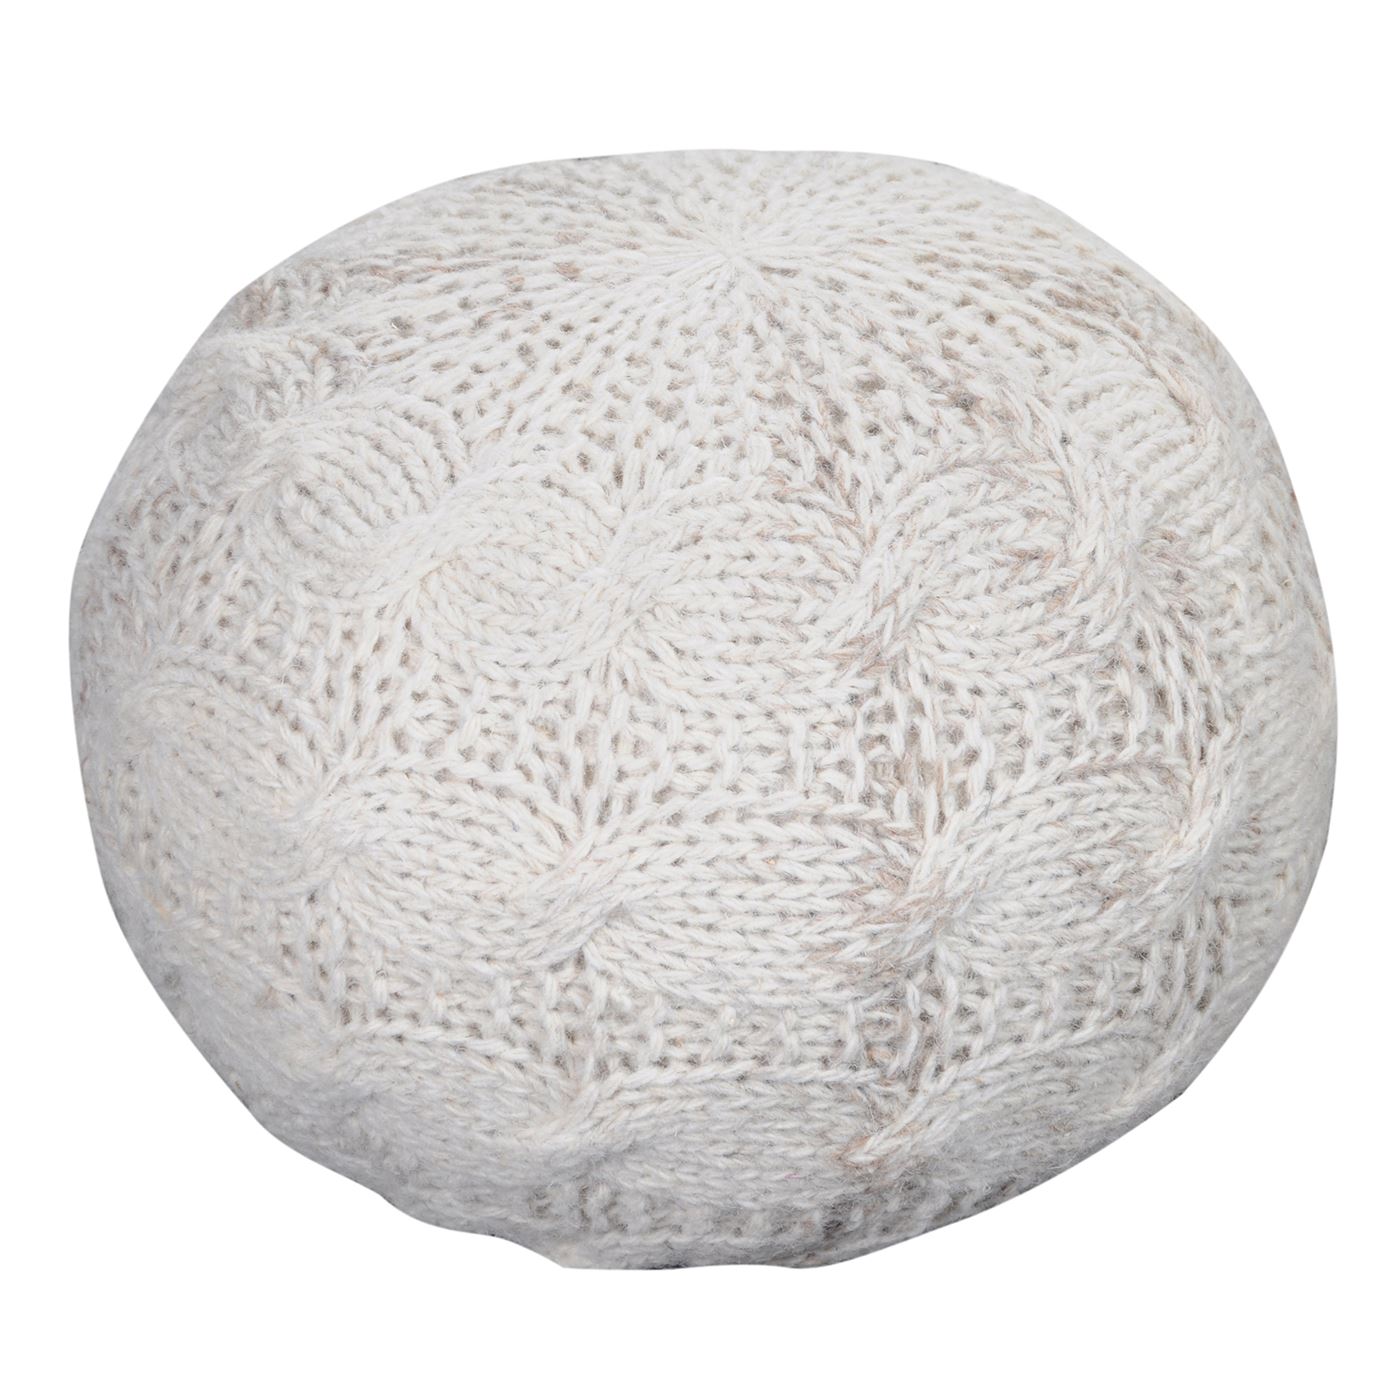 Oslo Round Pouf, Wool, Natural White, Hm Knitted, Flat Weave 